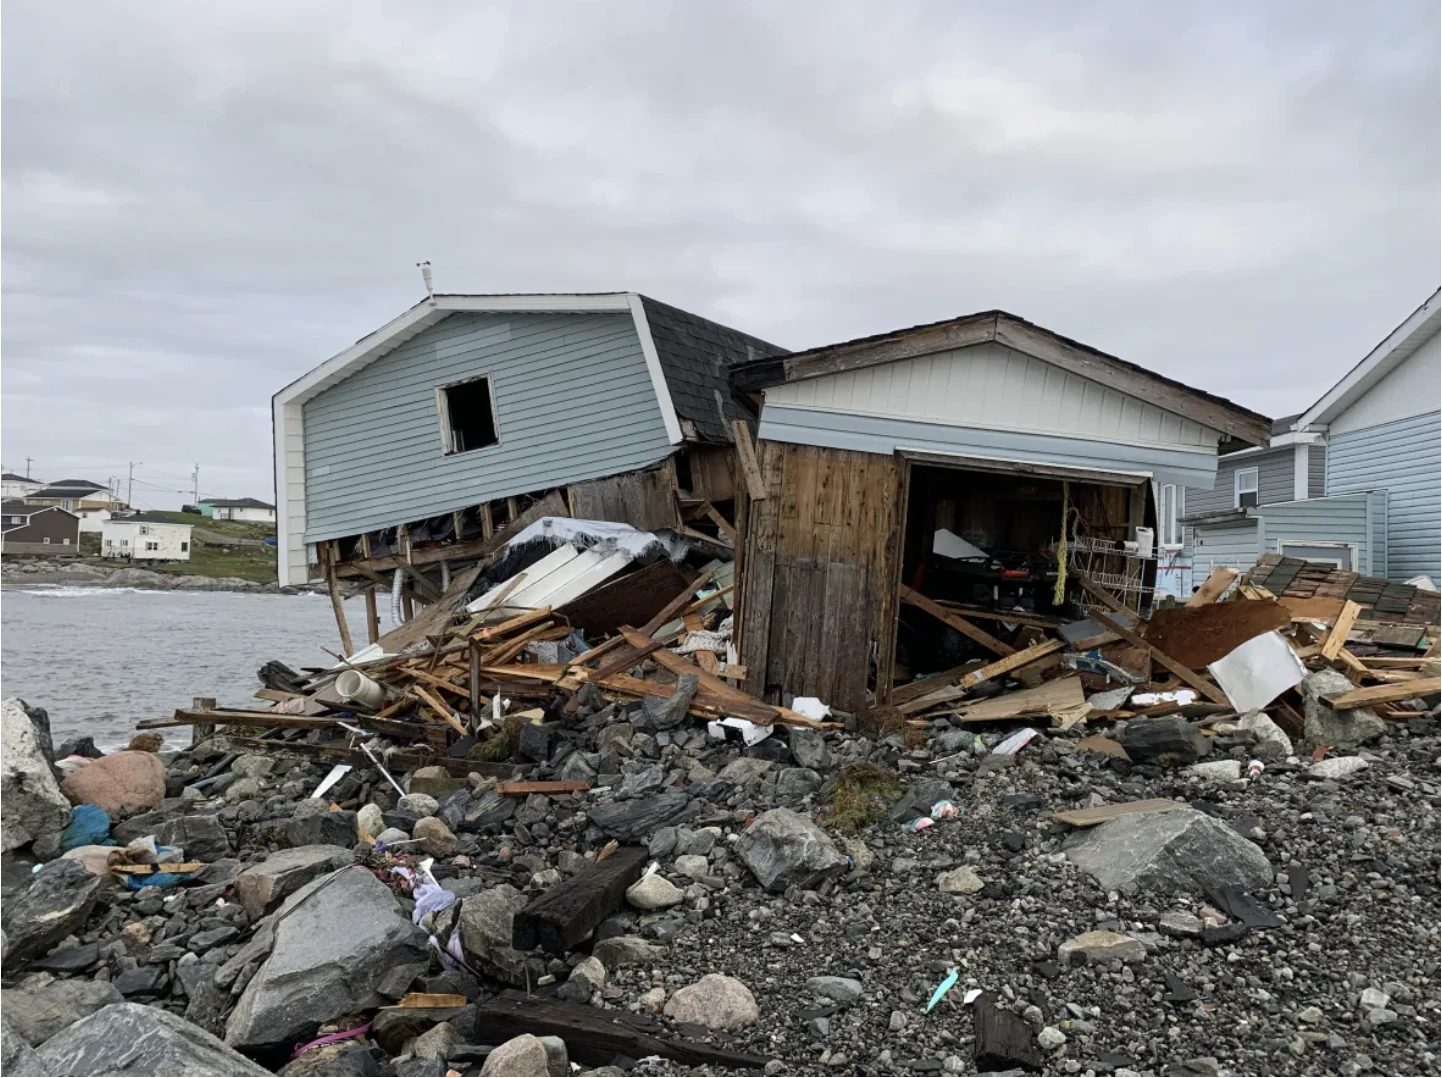 cbc: Some residents of Port aux Basques continue to wait for final results of their home assessment process, says Maj. David Harvey of the Salvation Army. (Malone Mullin/CBC)